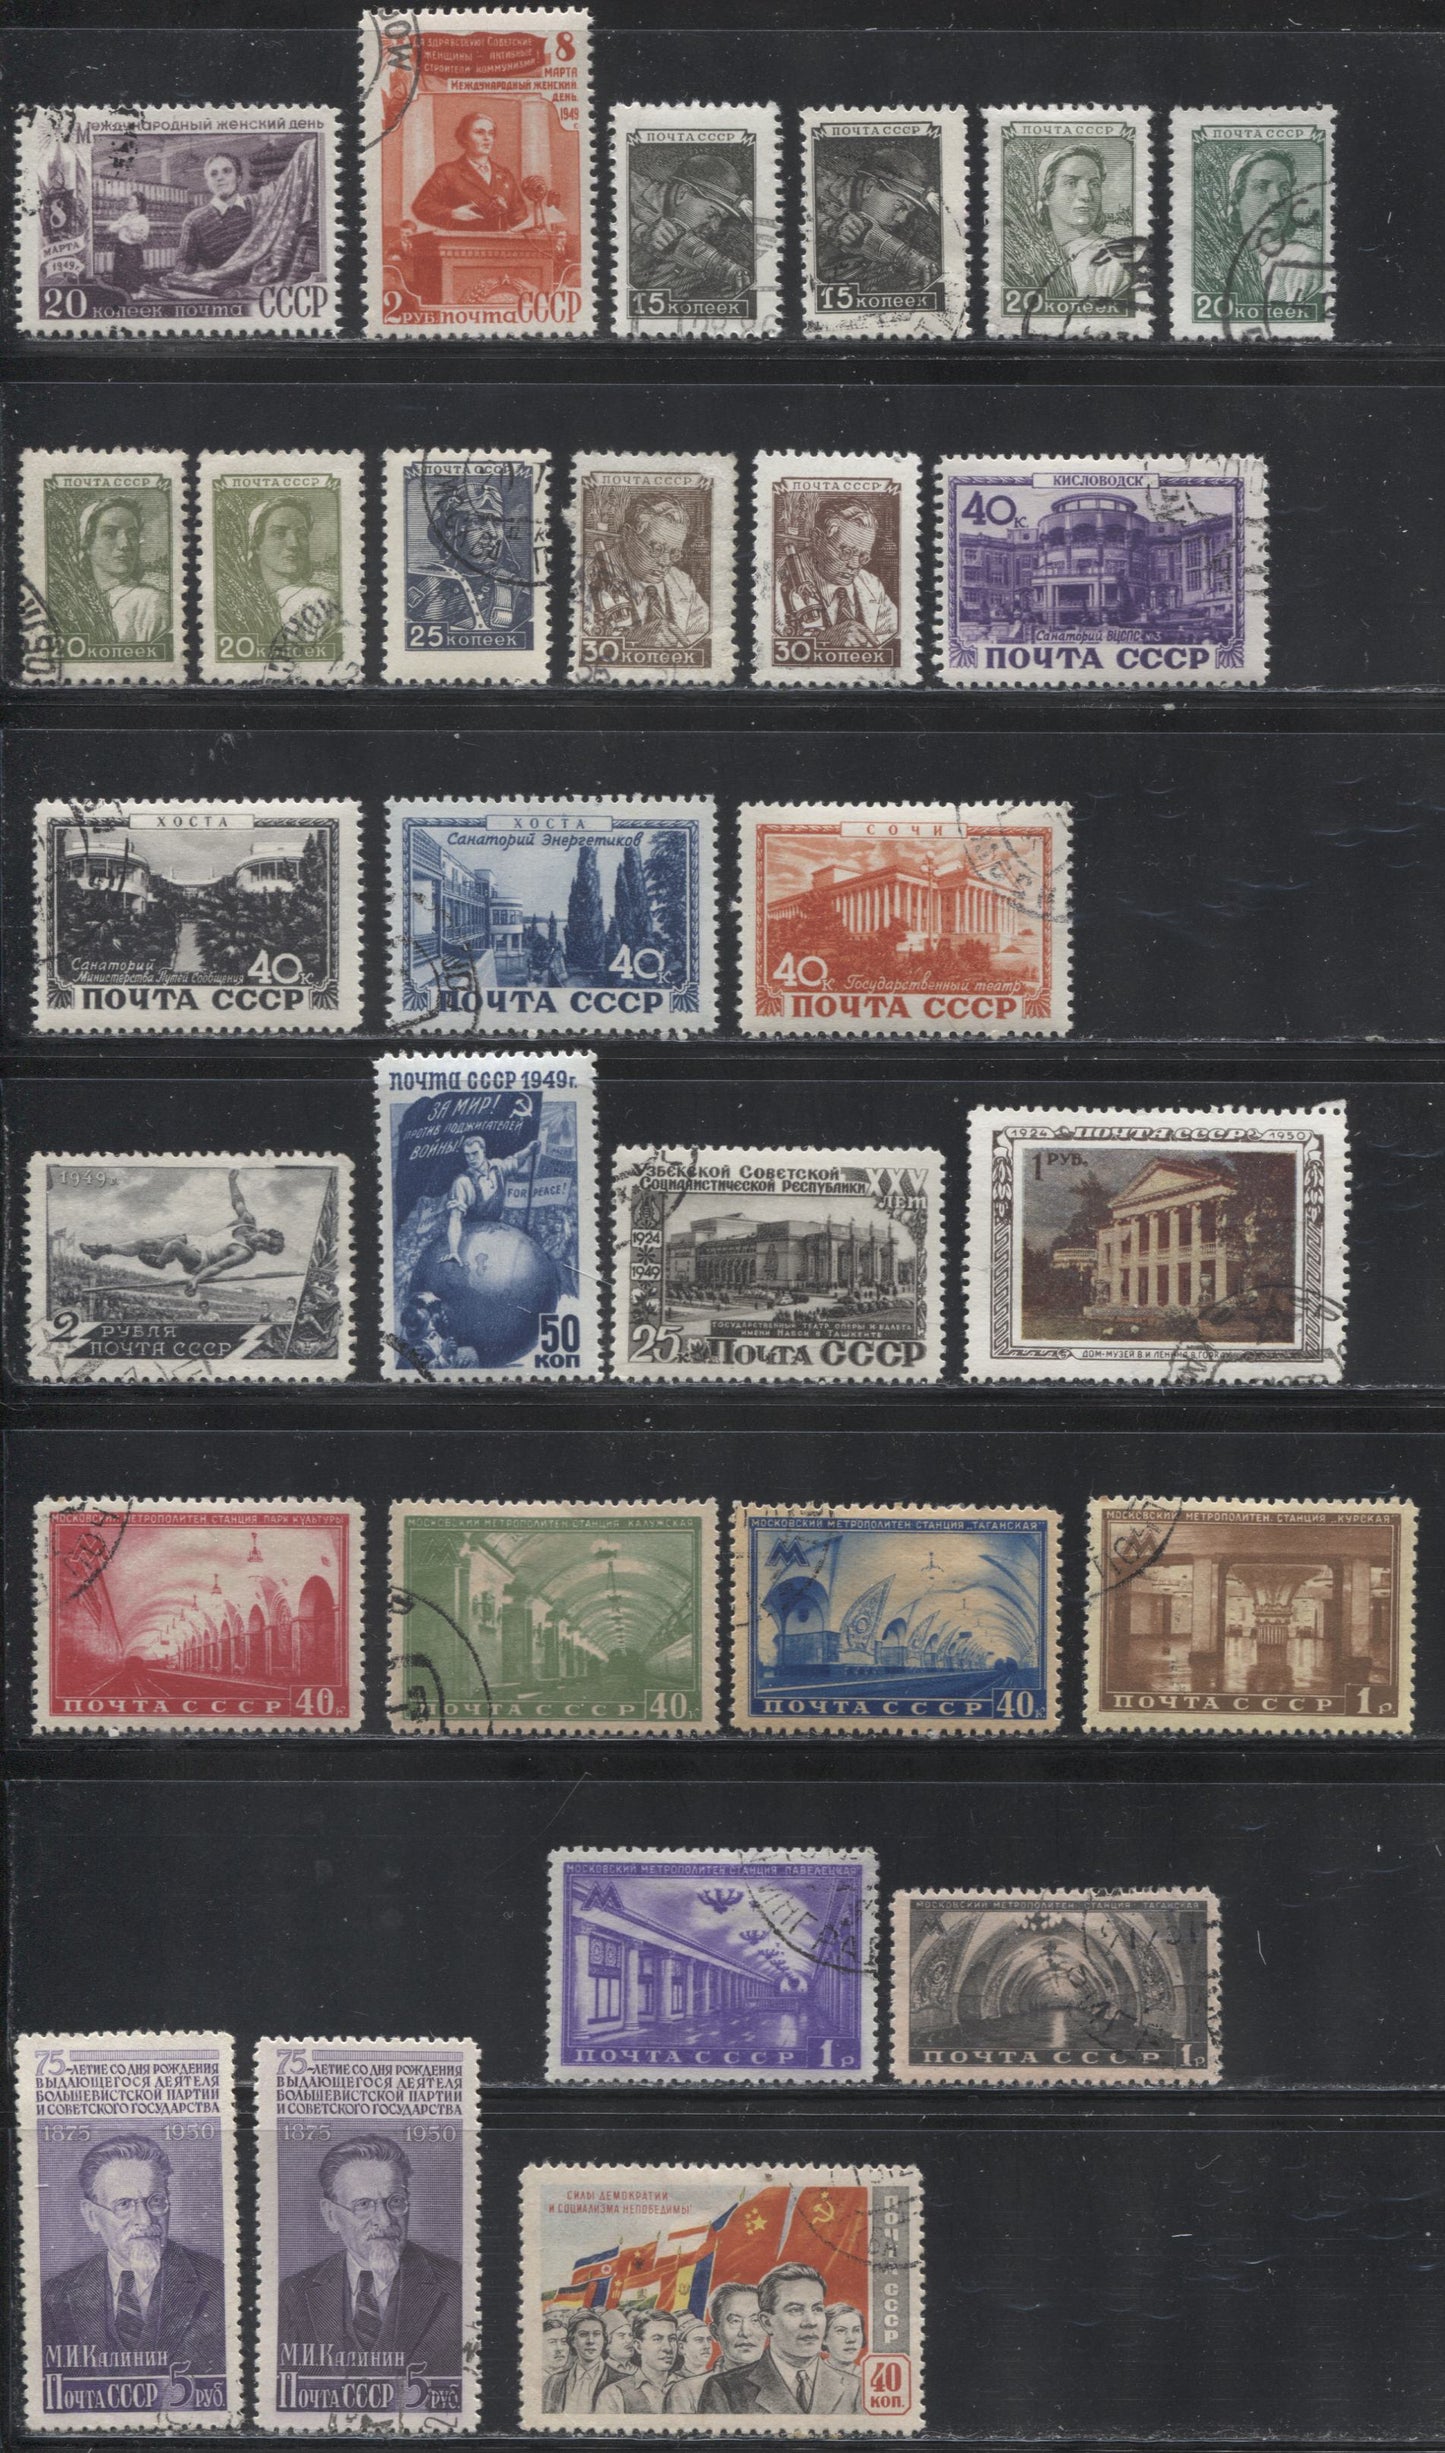 Lot 7 Russia #1334/1514 1949-1950 Commemorative Incomplete Sets and Odd Values, a F/VF CTO Used Group